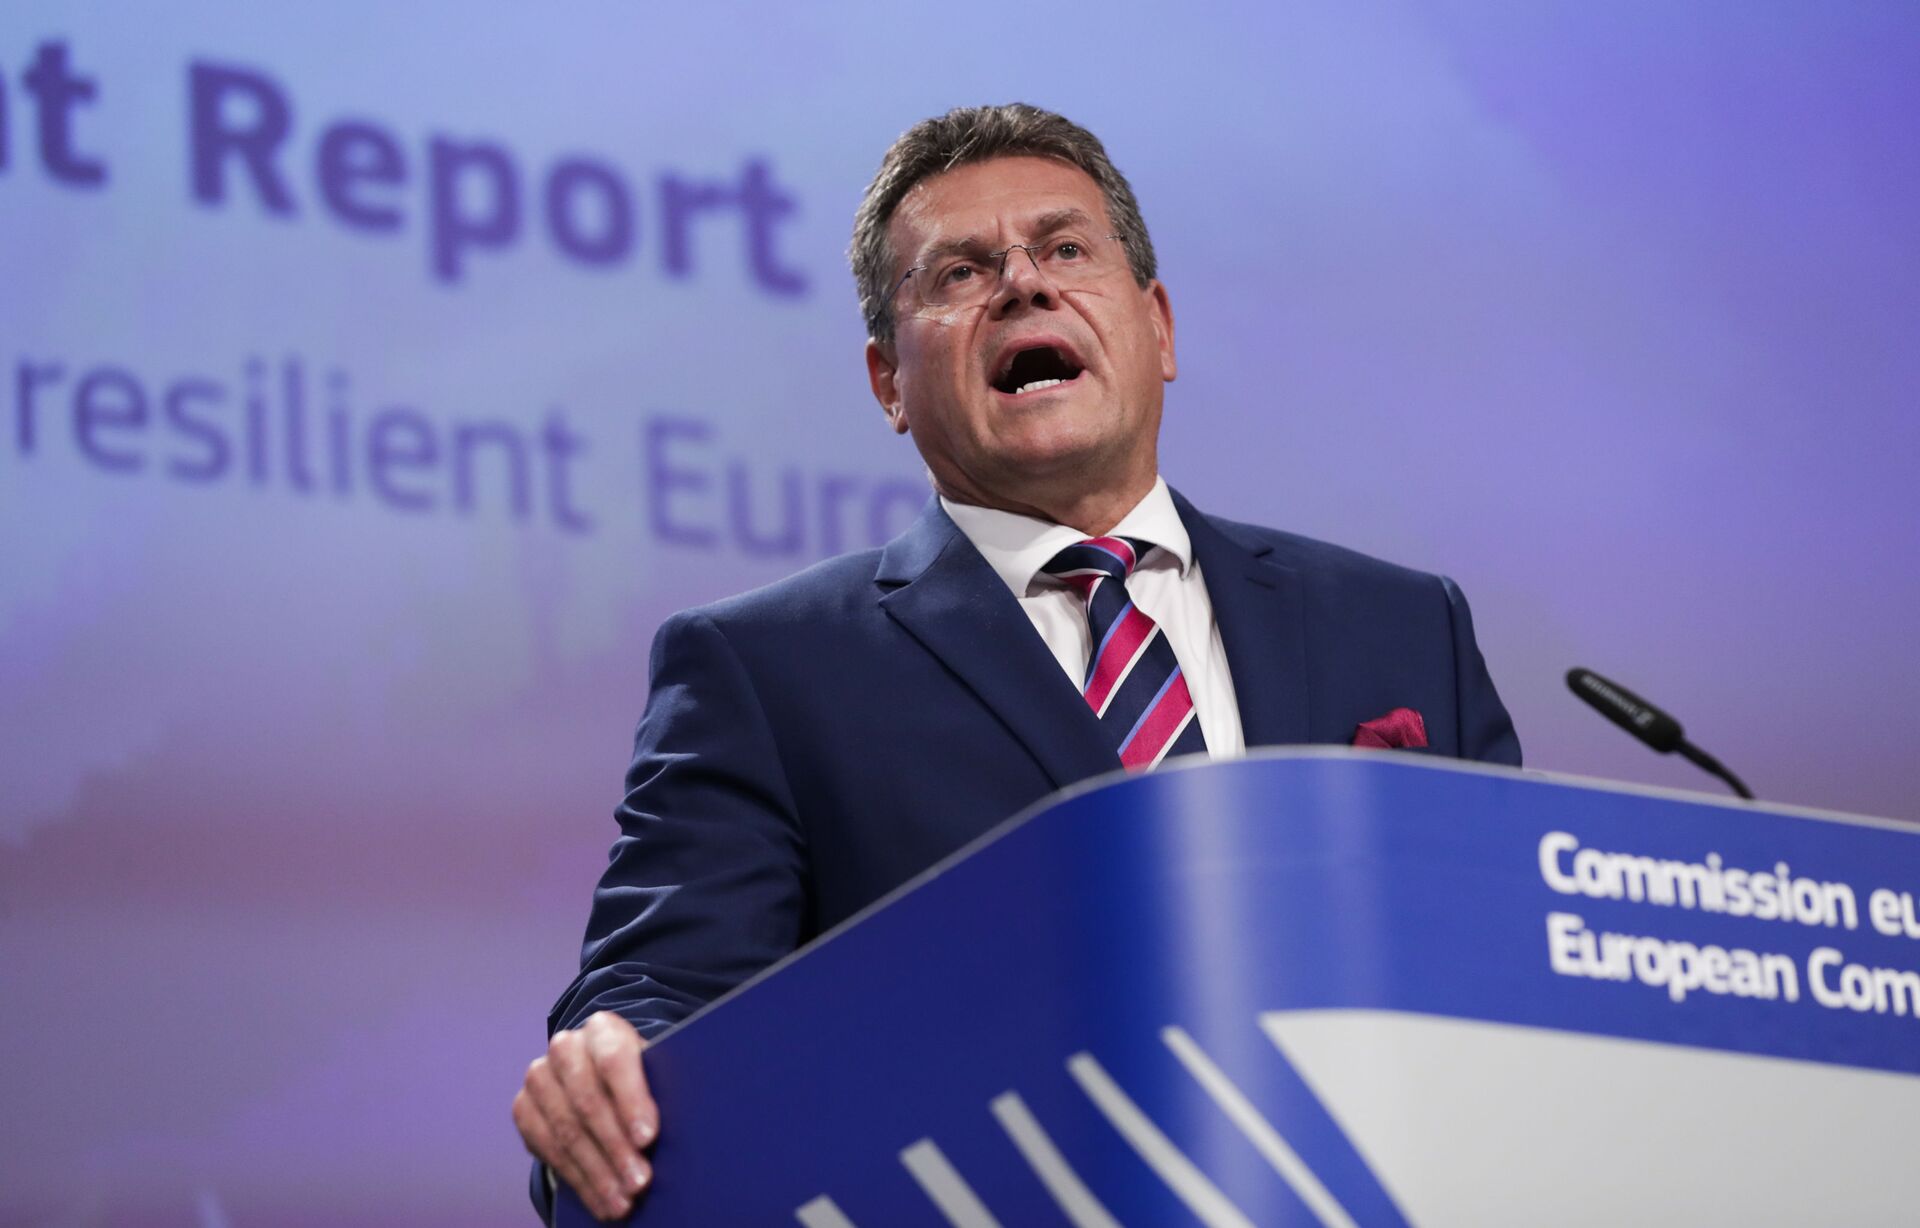 European Commissioner for Inter-institutional Relations and Foresight Maros Sefcovic talks to journalists during a news conference at the European Commission headquarters in Brussels, Wednesday, Sept. 9, 2020 - Sputnik International, 1920, 09.01.2022